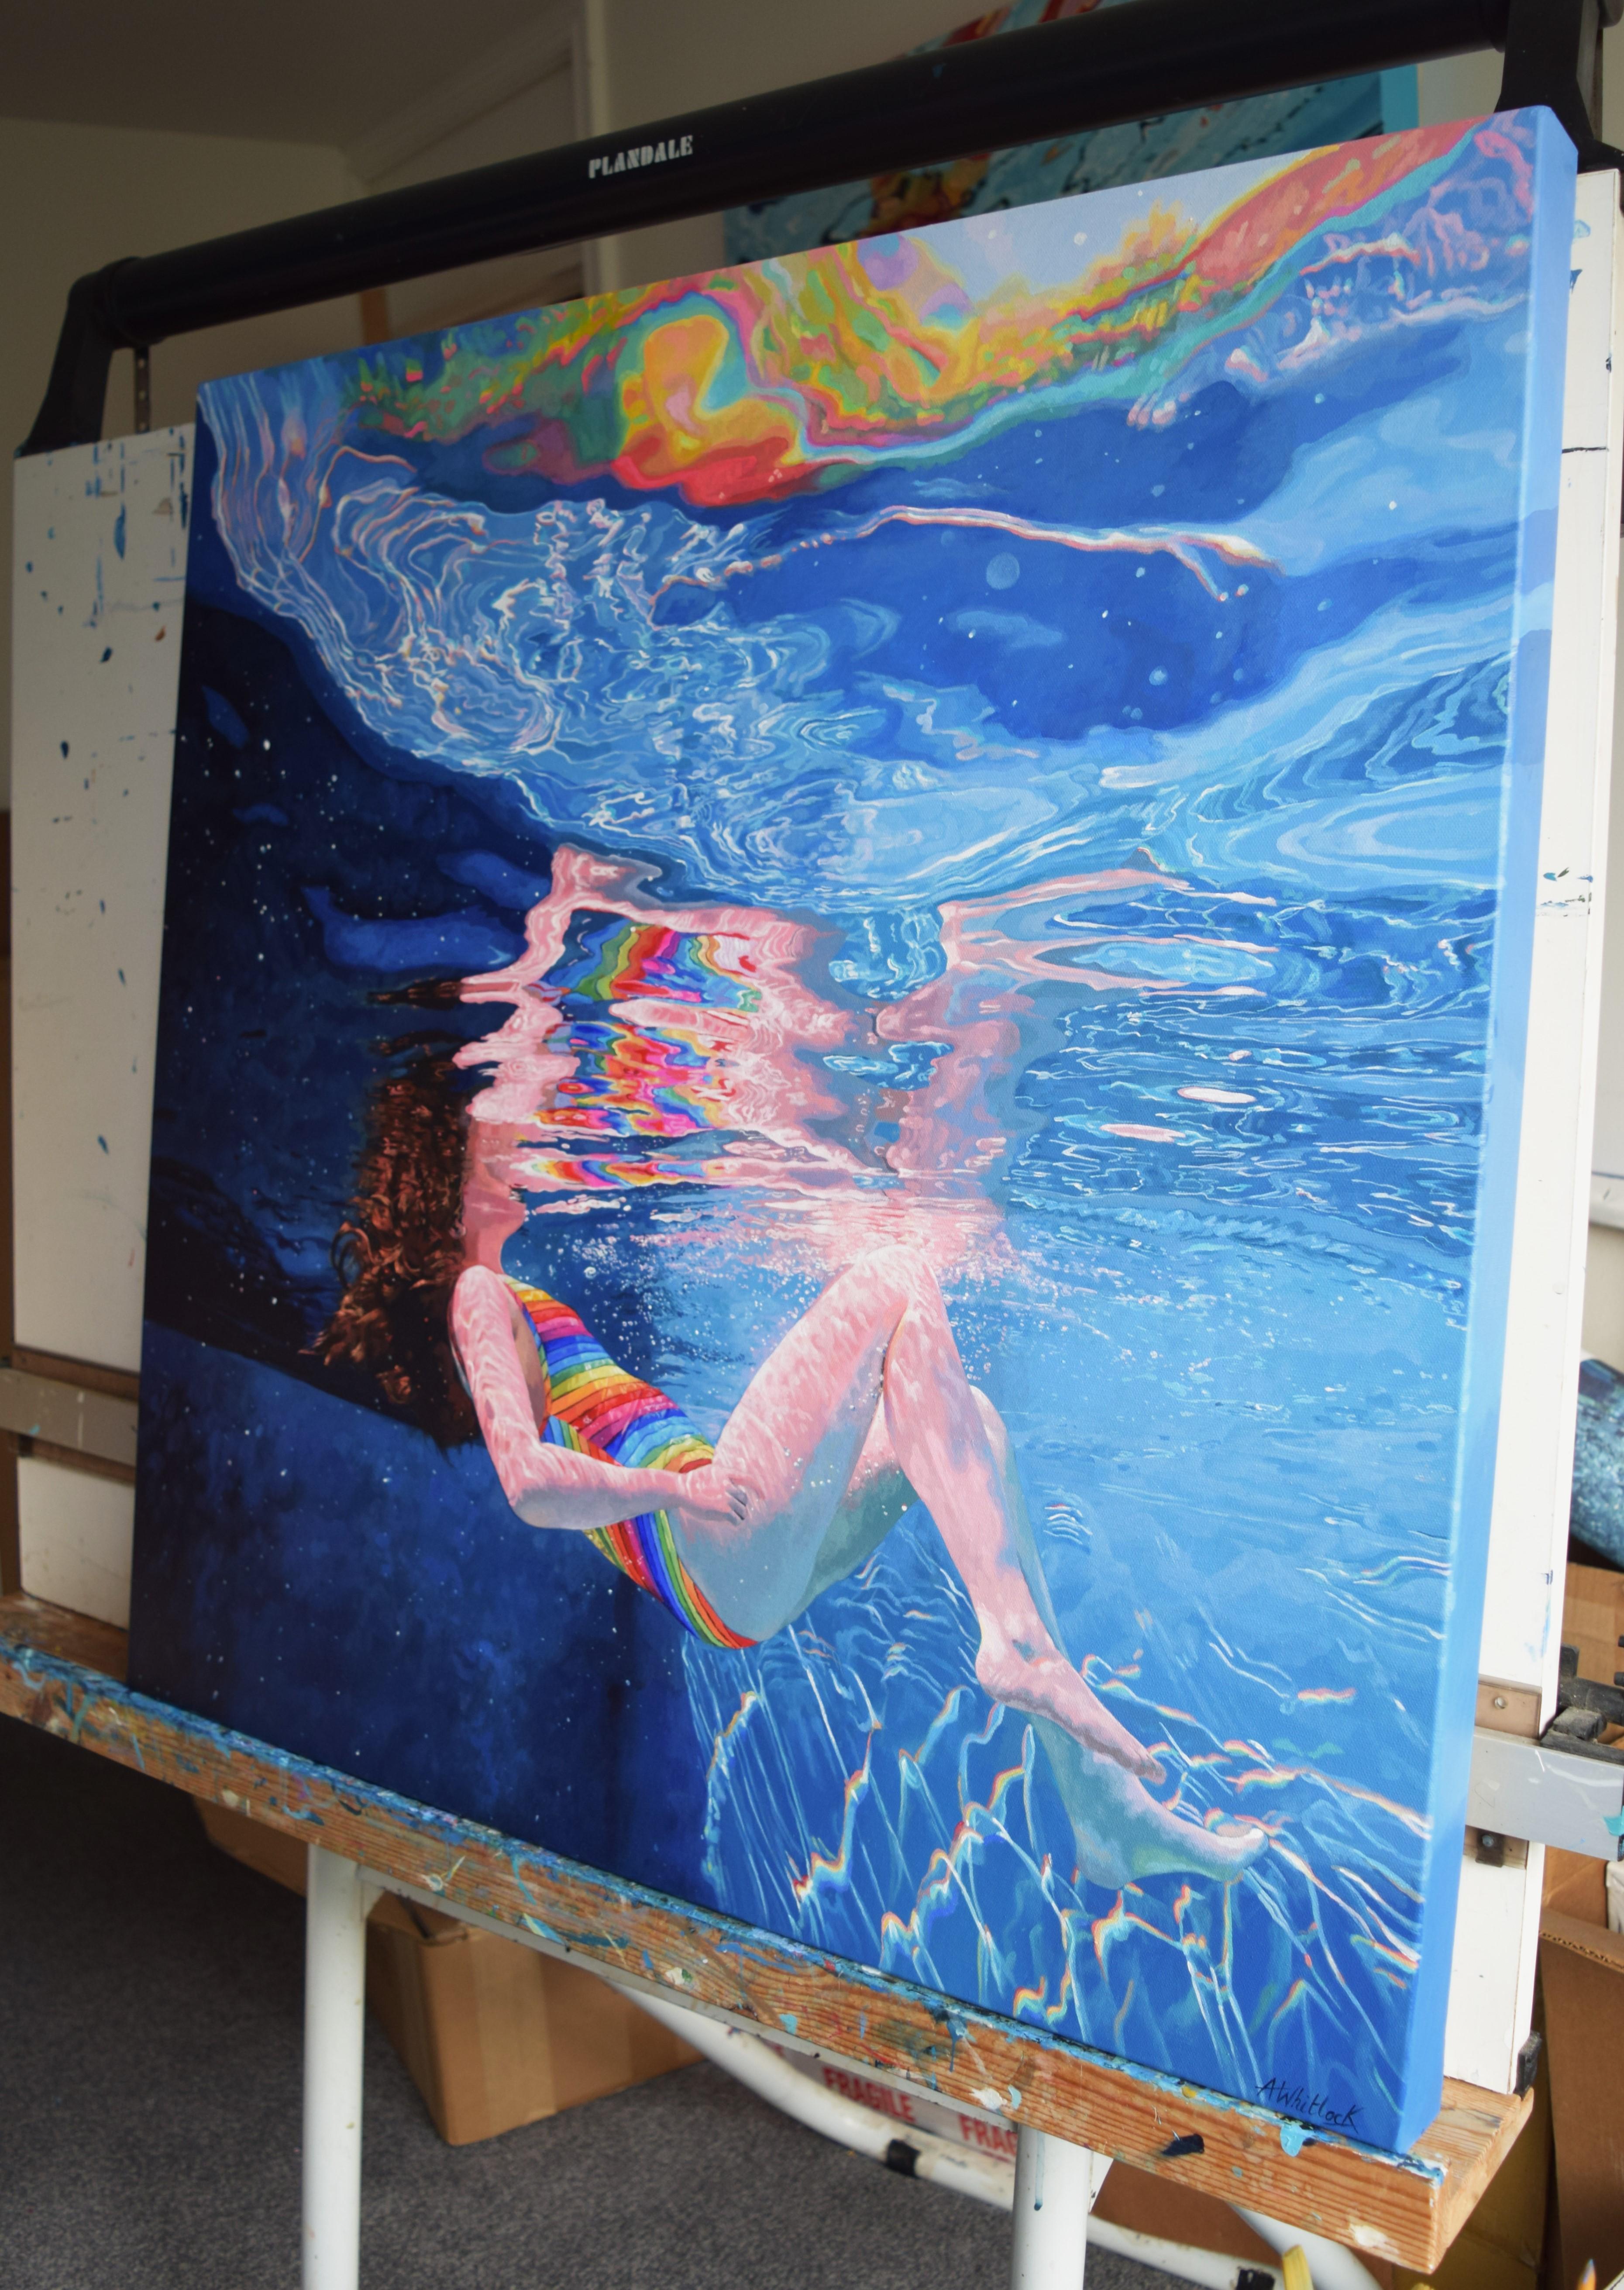 Reverie-original hyperrealistic figurative waterscape painting-contemporary art  - Painting by Abi Whitlock